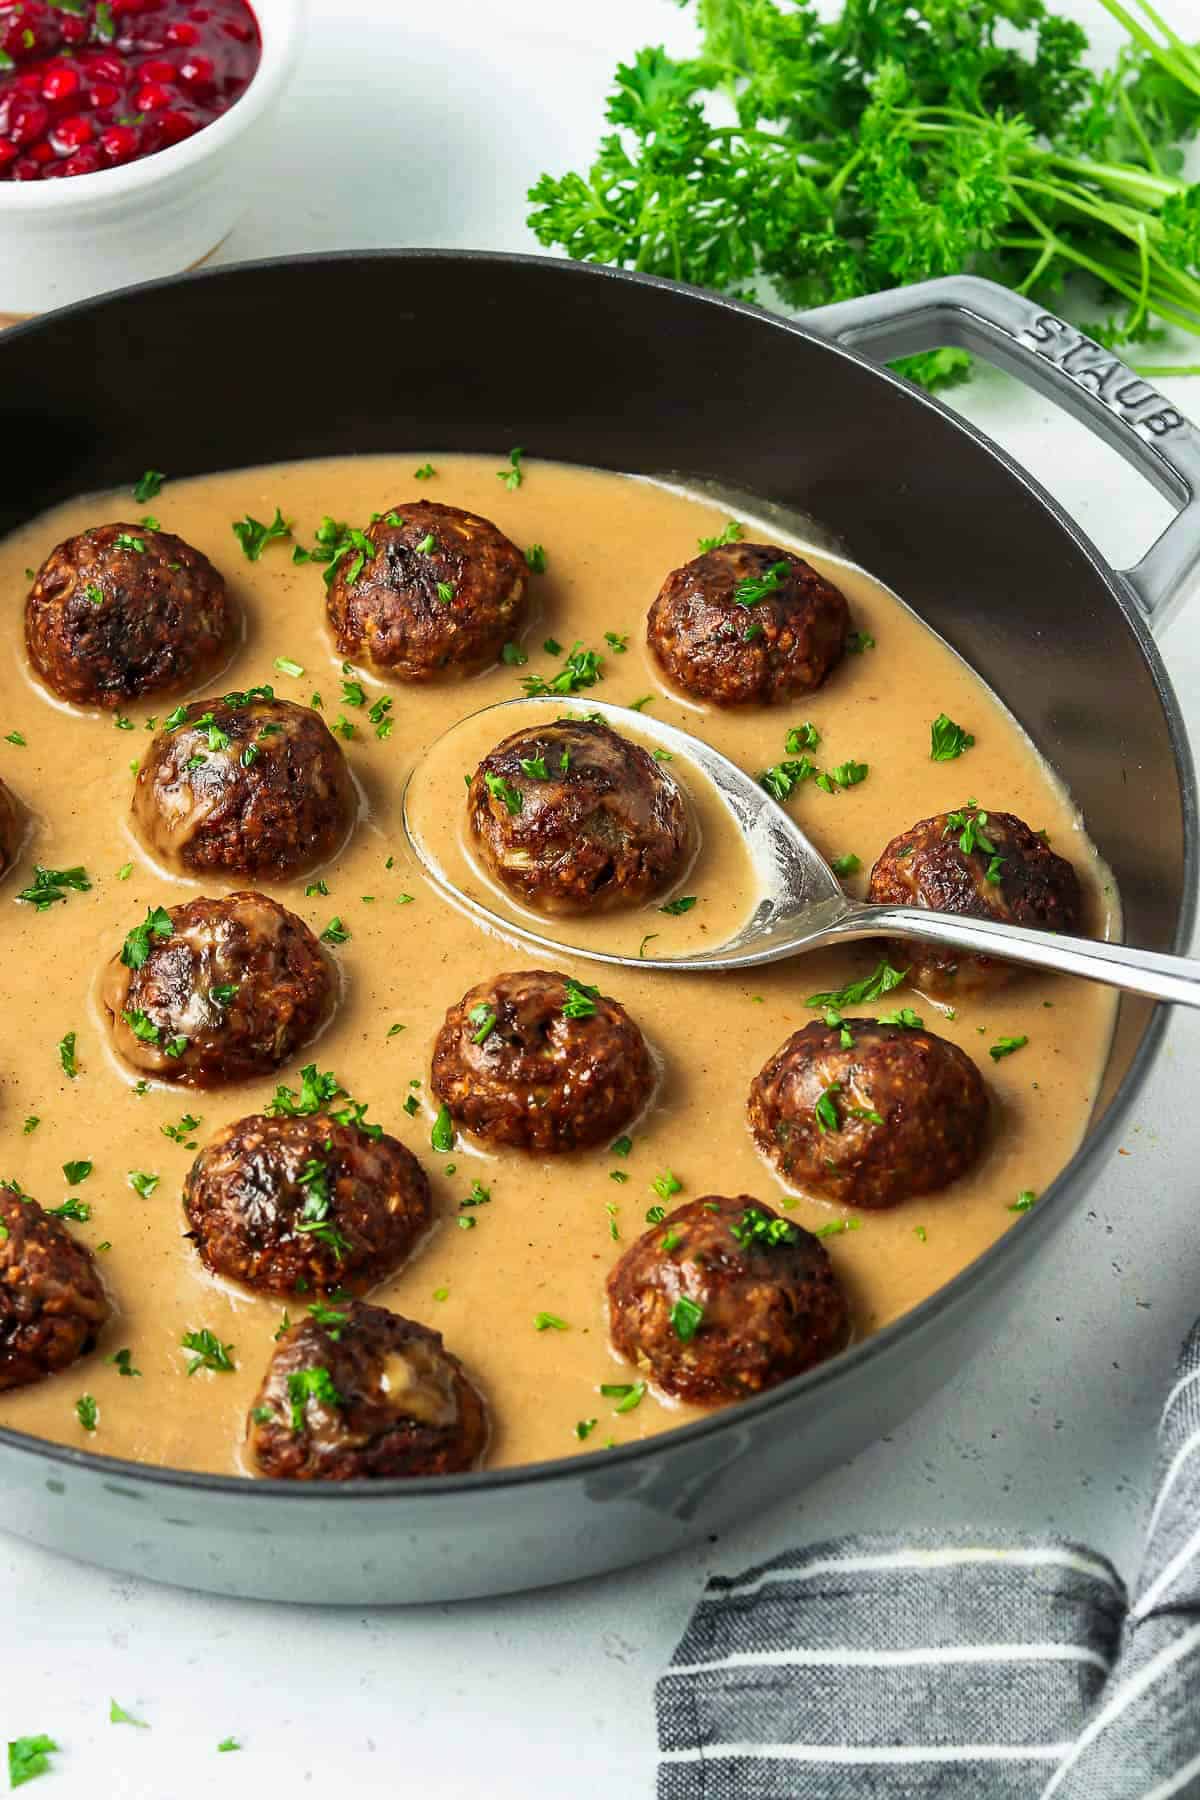 Sideview of vegan swedish meatballs in gravy with parsley on top.